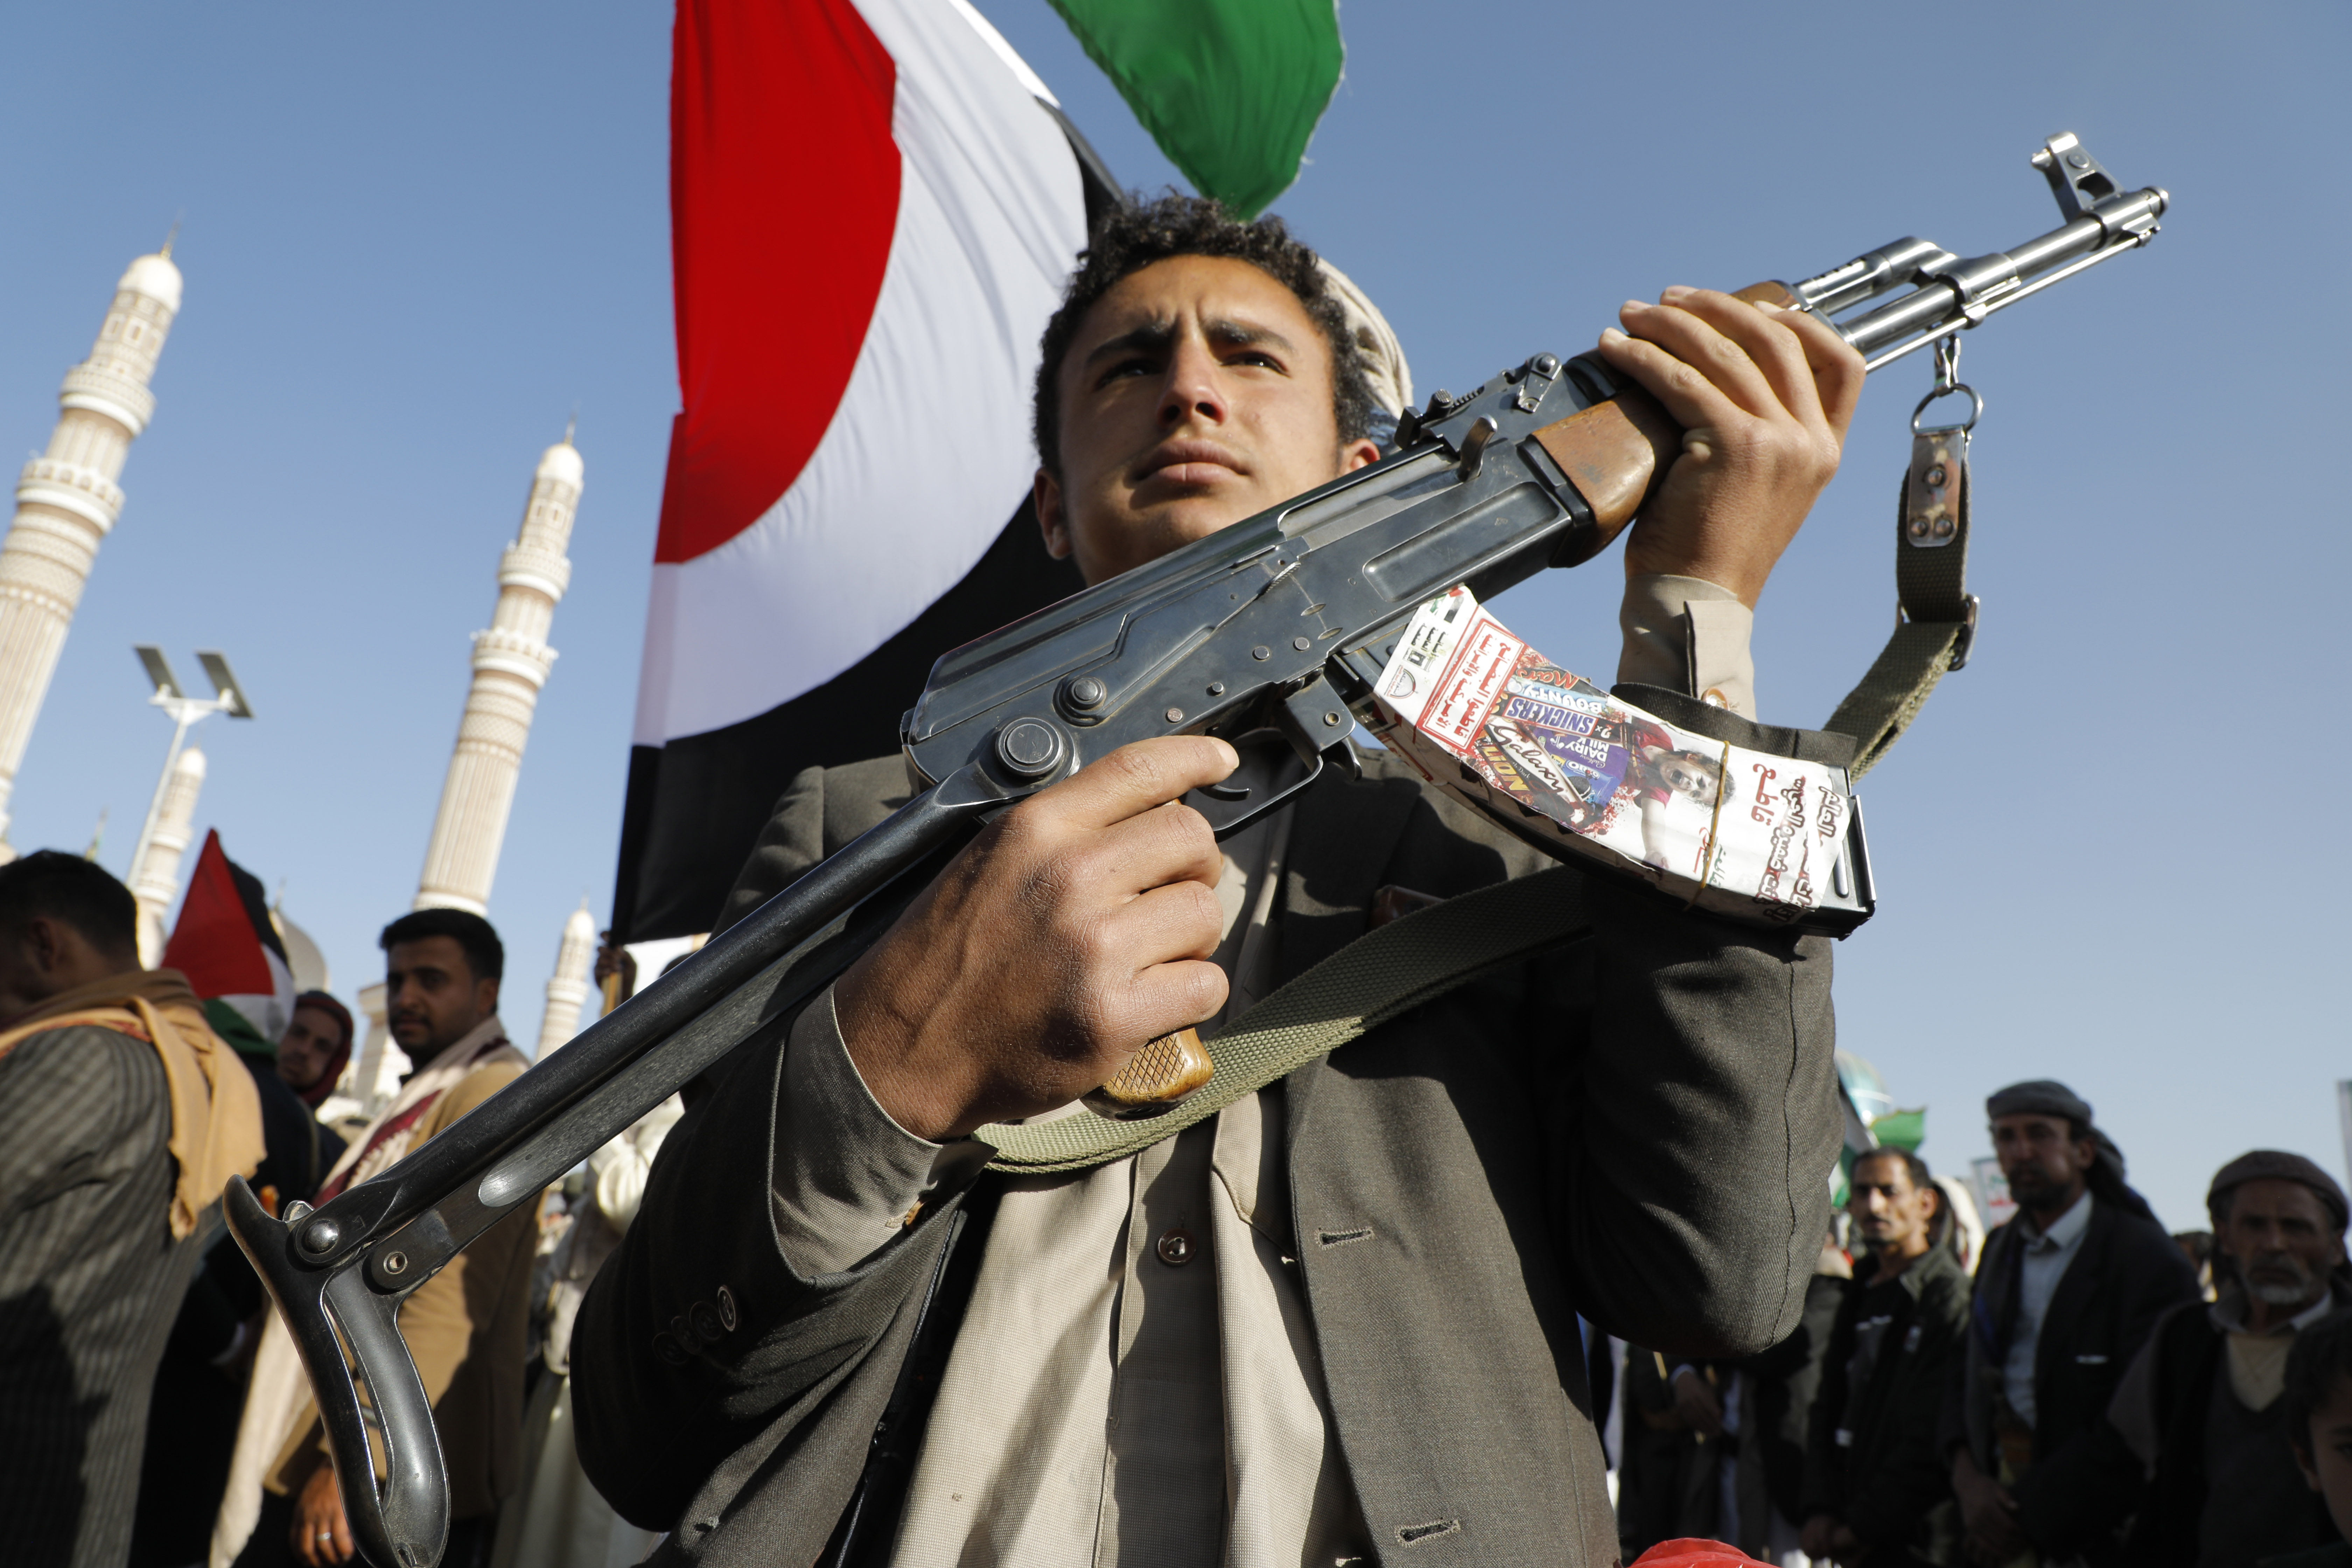 A man holds a gun during a protest in Yemen against the operation to safeguard trade and protect ships in the Red Sea. EPA